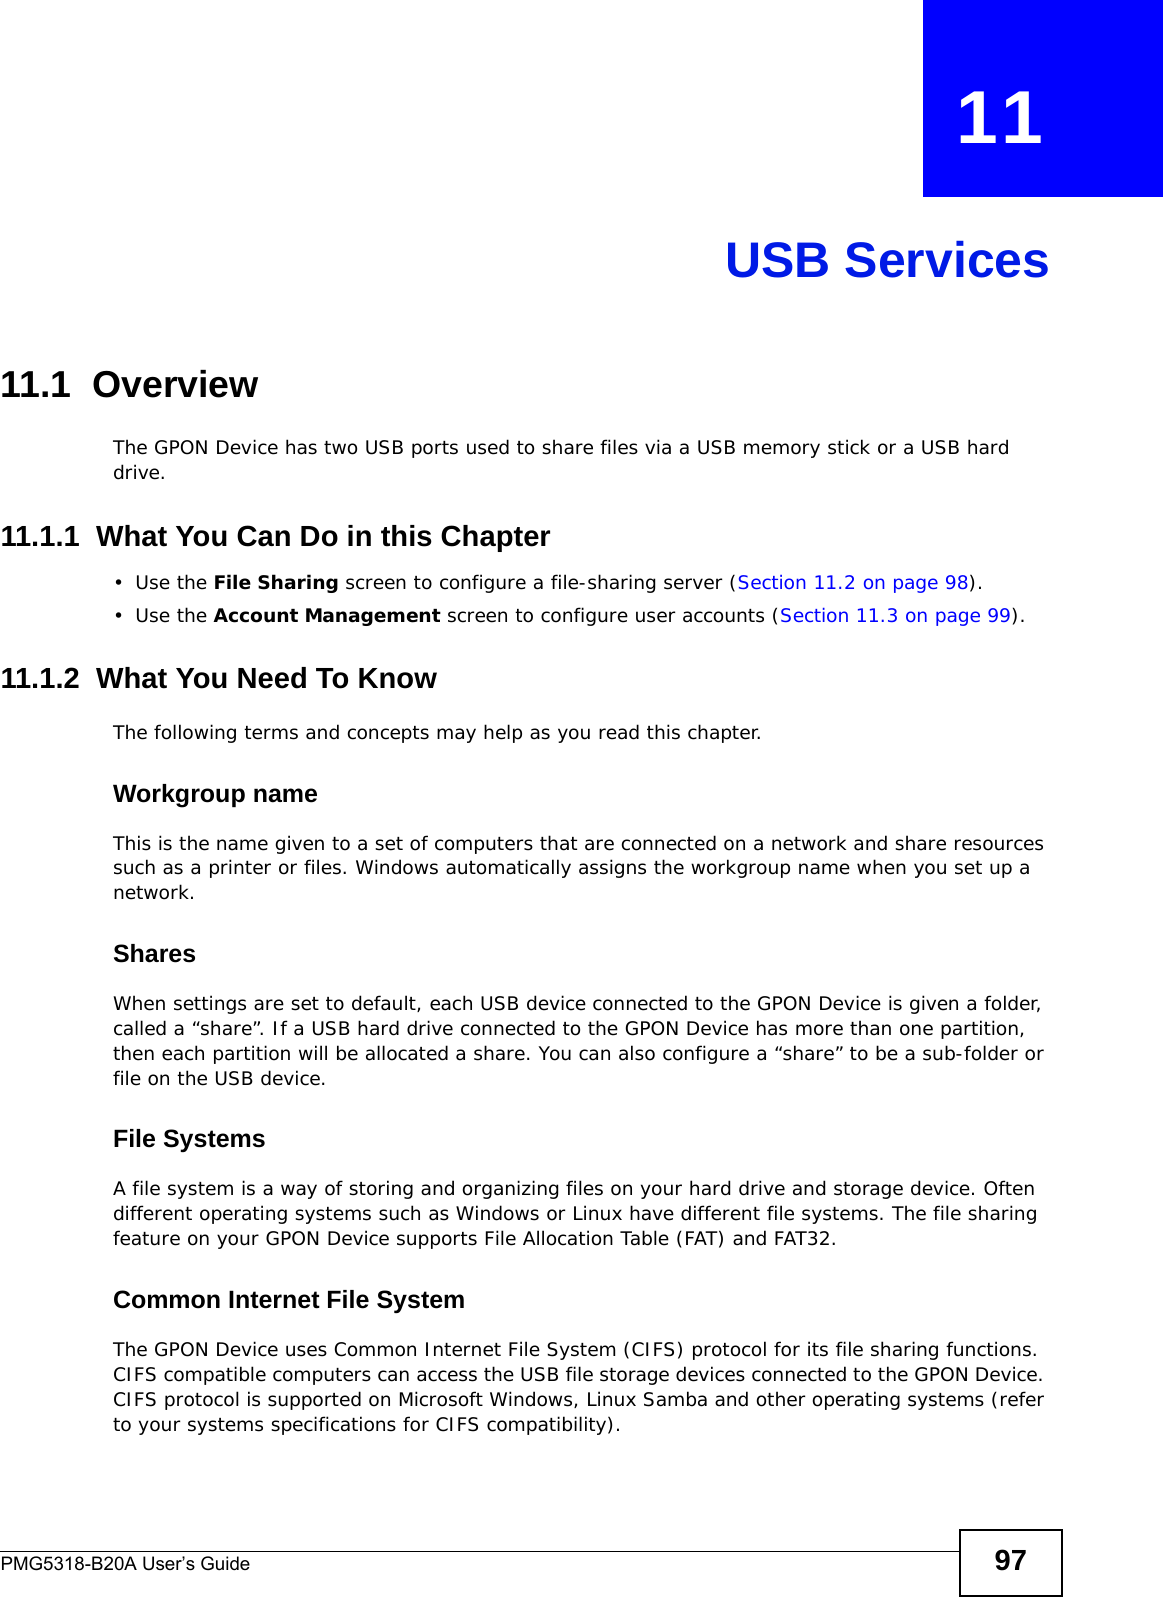 PMG5318-B20A User’s Guide 97CHAPTER   11USB Services11.1  Overview The GPON Device has two USB ports used to share files via a USB memory stick or a USB hard drive.11.1.1  What You Can Do in this Chapter•Use the File Sharing screen to configure a file-sharing server (Section 11.2 on page 98).•Use the Account Management screen to configure user accounts (Section 11.3 on page 99).11.1.2  What You Need To KnowThe following terms and concepts may help as you read this chapter.Workgroup nameThis is the name given to a set of computers that are connected on a network and share resources such as a printer or files. Windows automatically assigns the workgroup name when you set up a network. SharesWhen settings are set to default, each USB device connected to the GPON Device is given a folder, called a “share”. If a USB hard drive connected to the GPON Device has more than one partition, then each partition will be allocated a share. You can also configure a “share” to be a sub-folder or file on the USB device.File SystemsA file system is a way of storing and organizing files on your hard drive and storage device. Often different operating systems such as Windows or Linux have different file systems. The file sharing feature on your GPON Device supports File Allocation Table (FAT) and FAT32. Common Internet File SystemThe GPON Device uses Common Internet File System (CIFS) protocol for its file sharing functions. CIFS compatible computers can access the USB file storage devices connected to the GPON Device. CIFS protocol is supported on Microsoft Windows, Linux Samba and other operating systems (refer to your systems specifications for CIFS compatibility). 